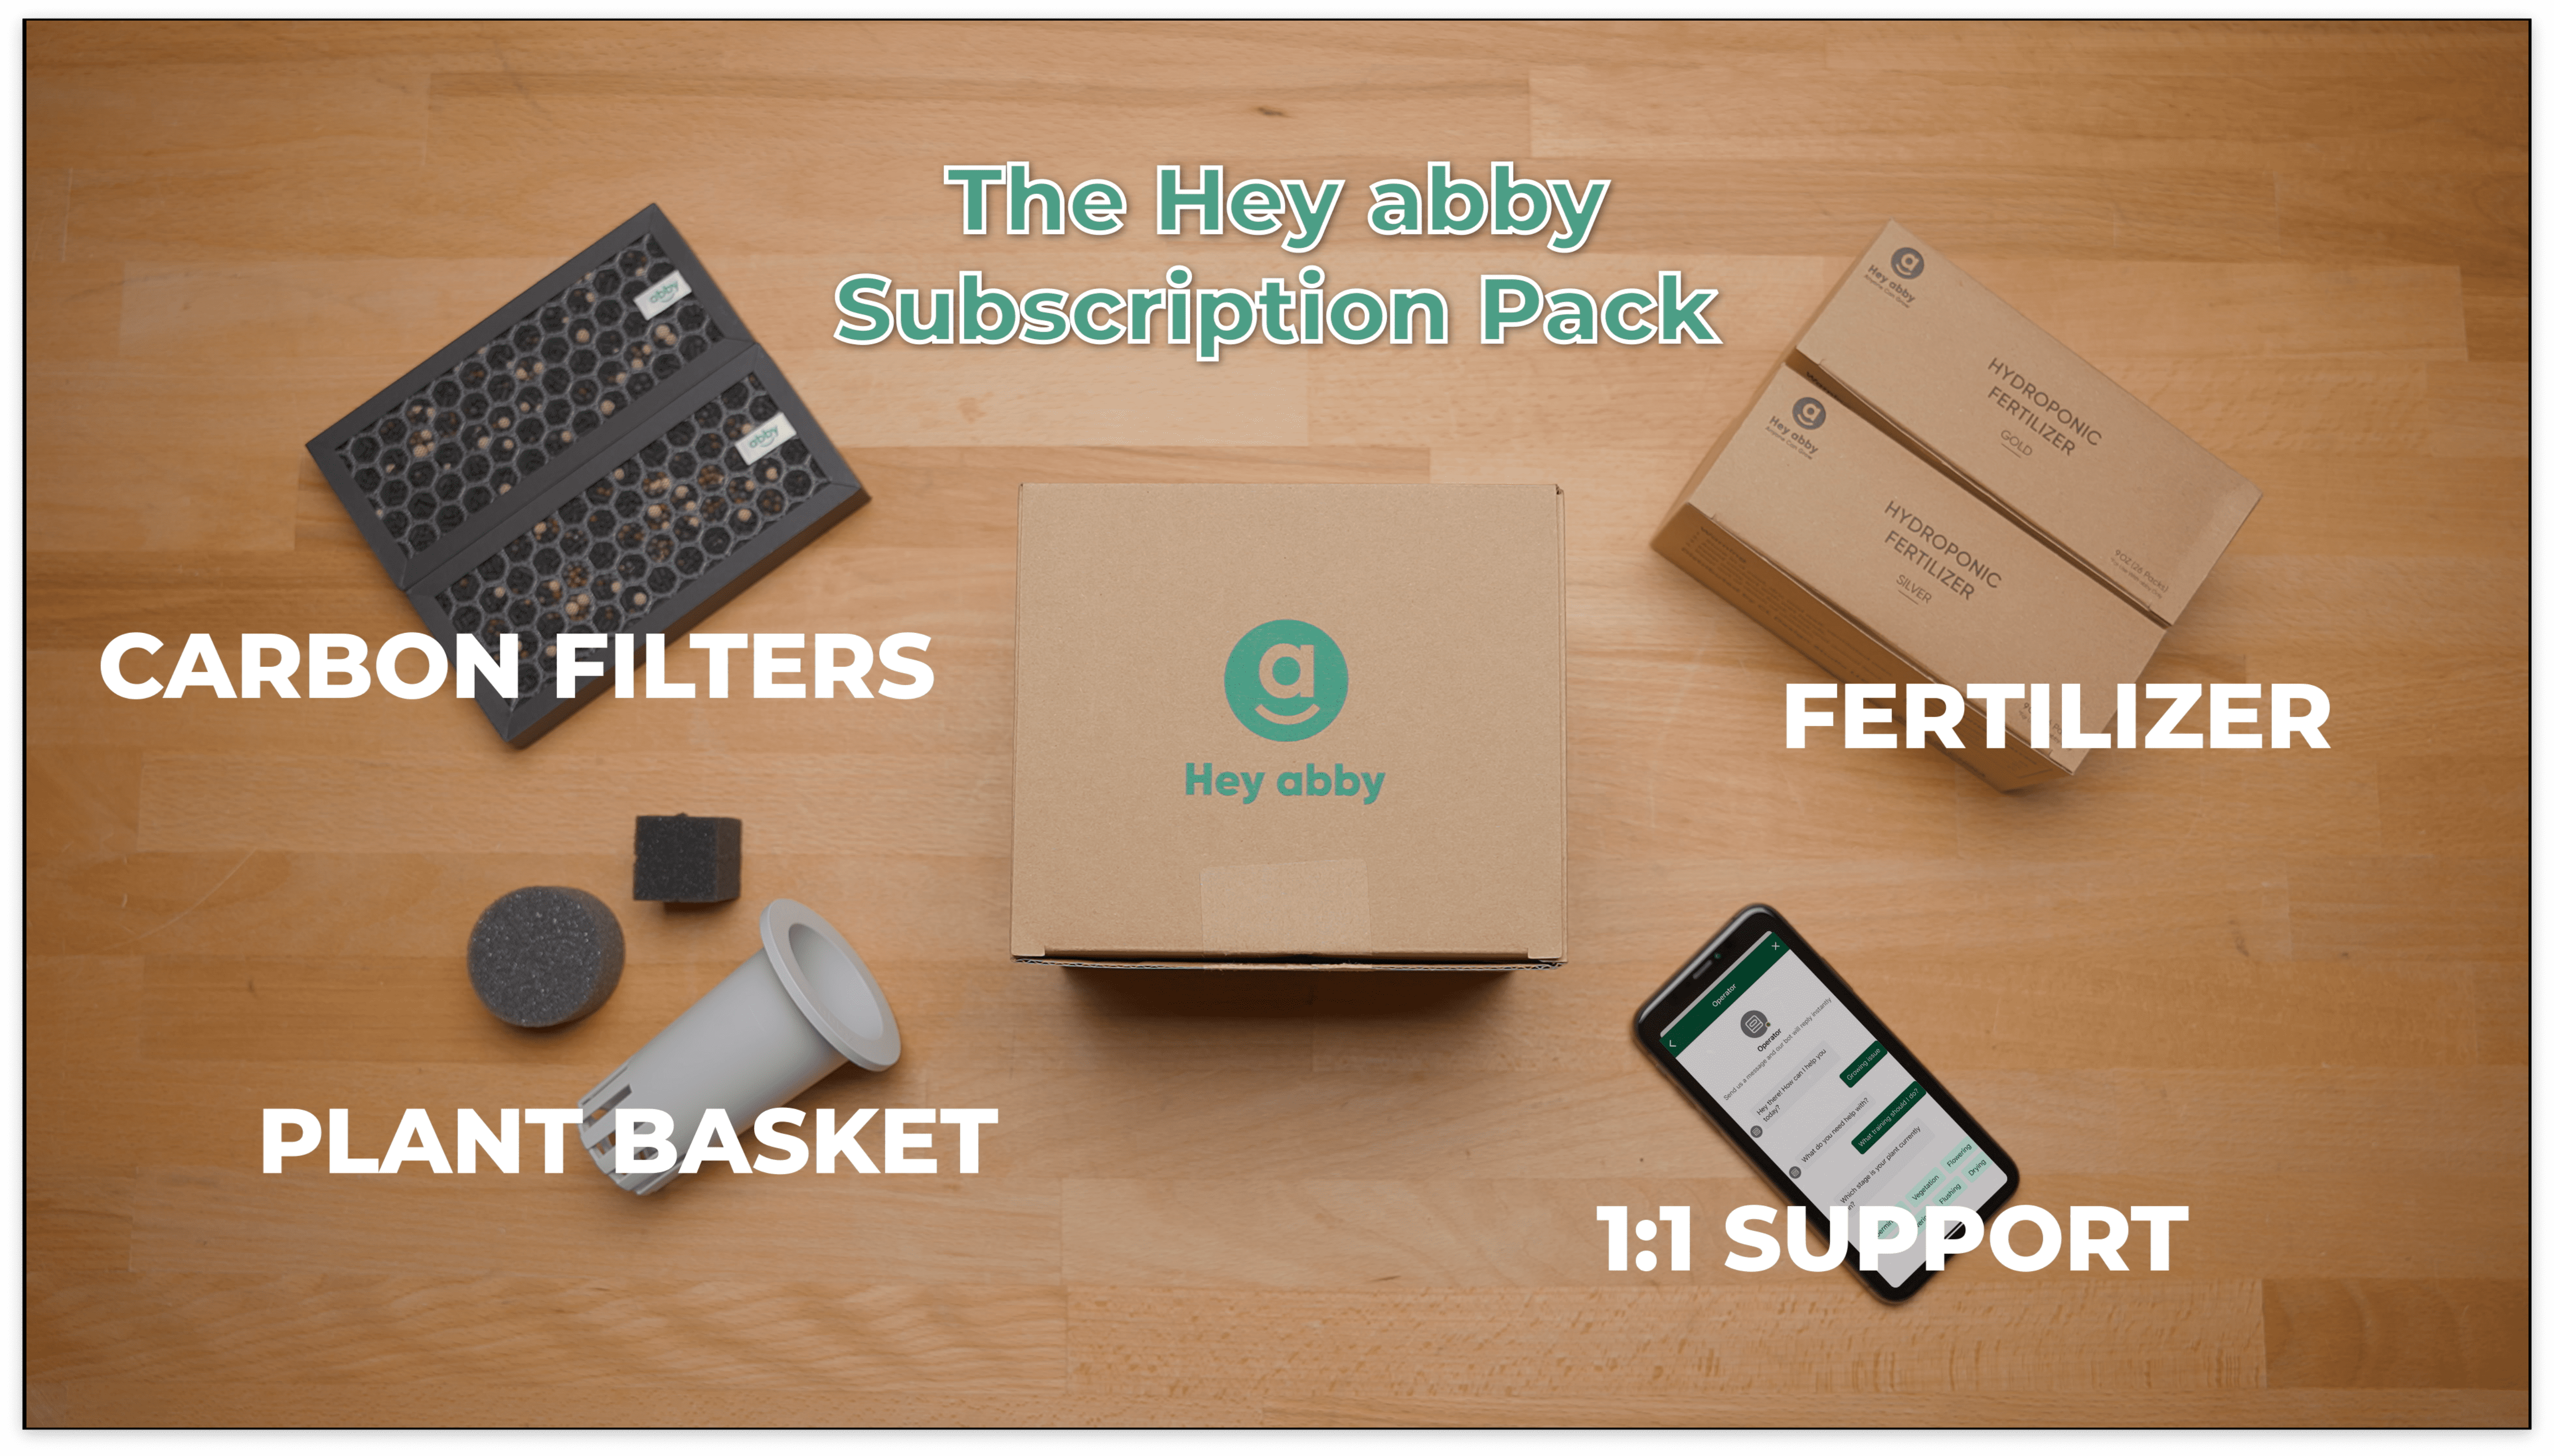 Hey abby subscription package